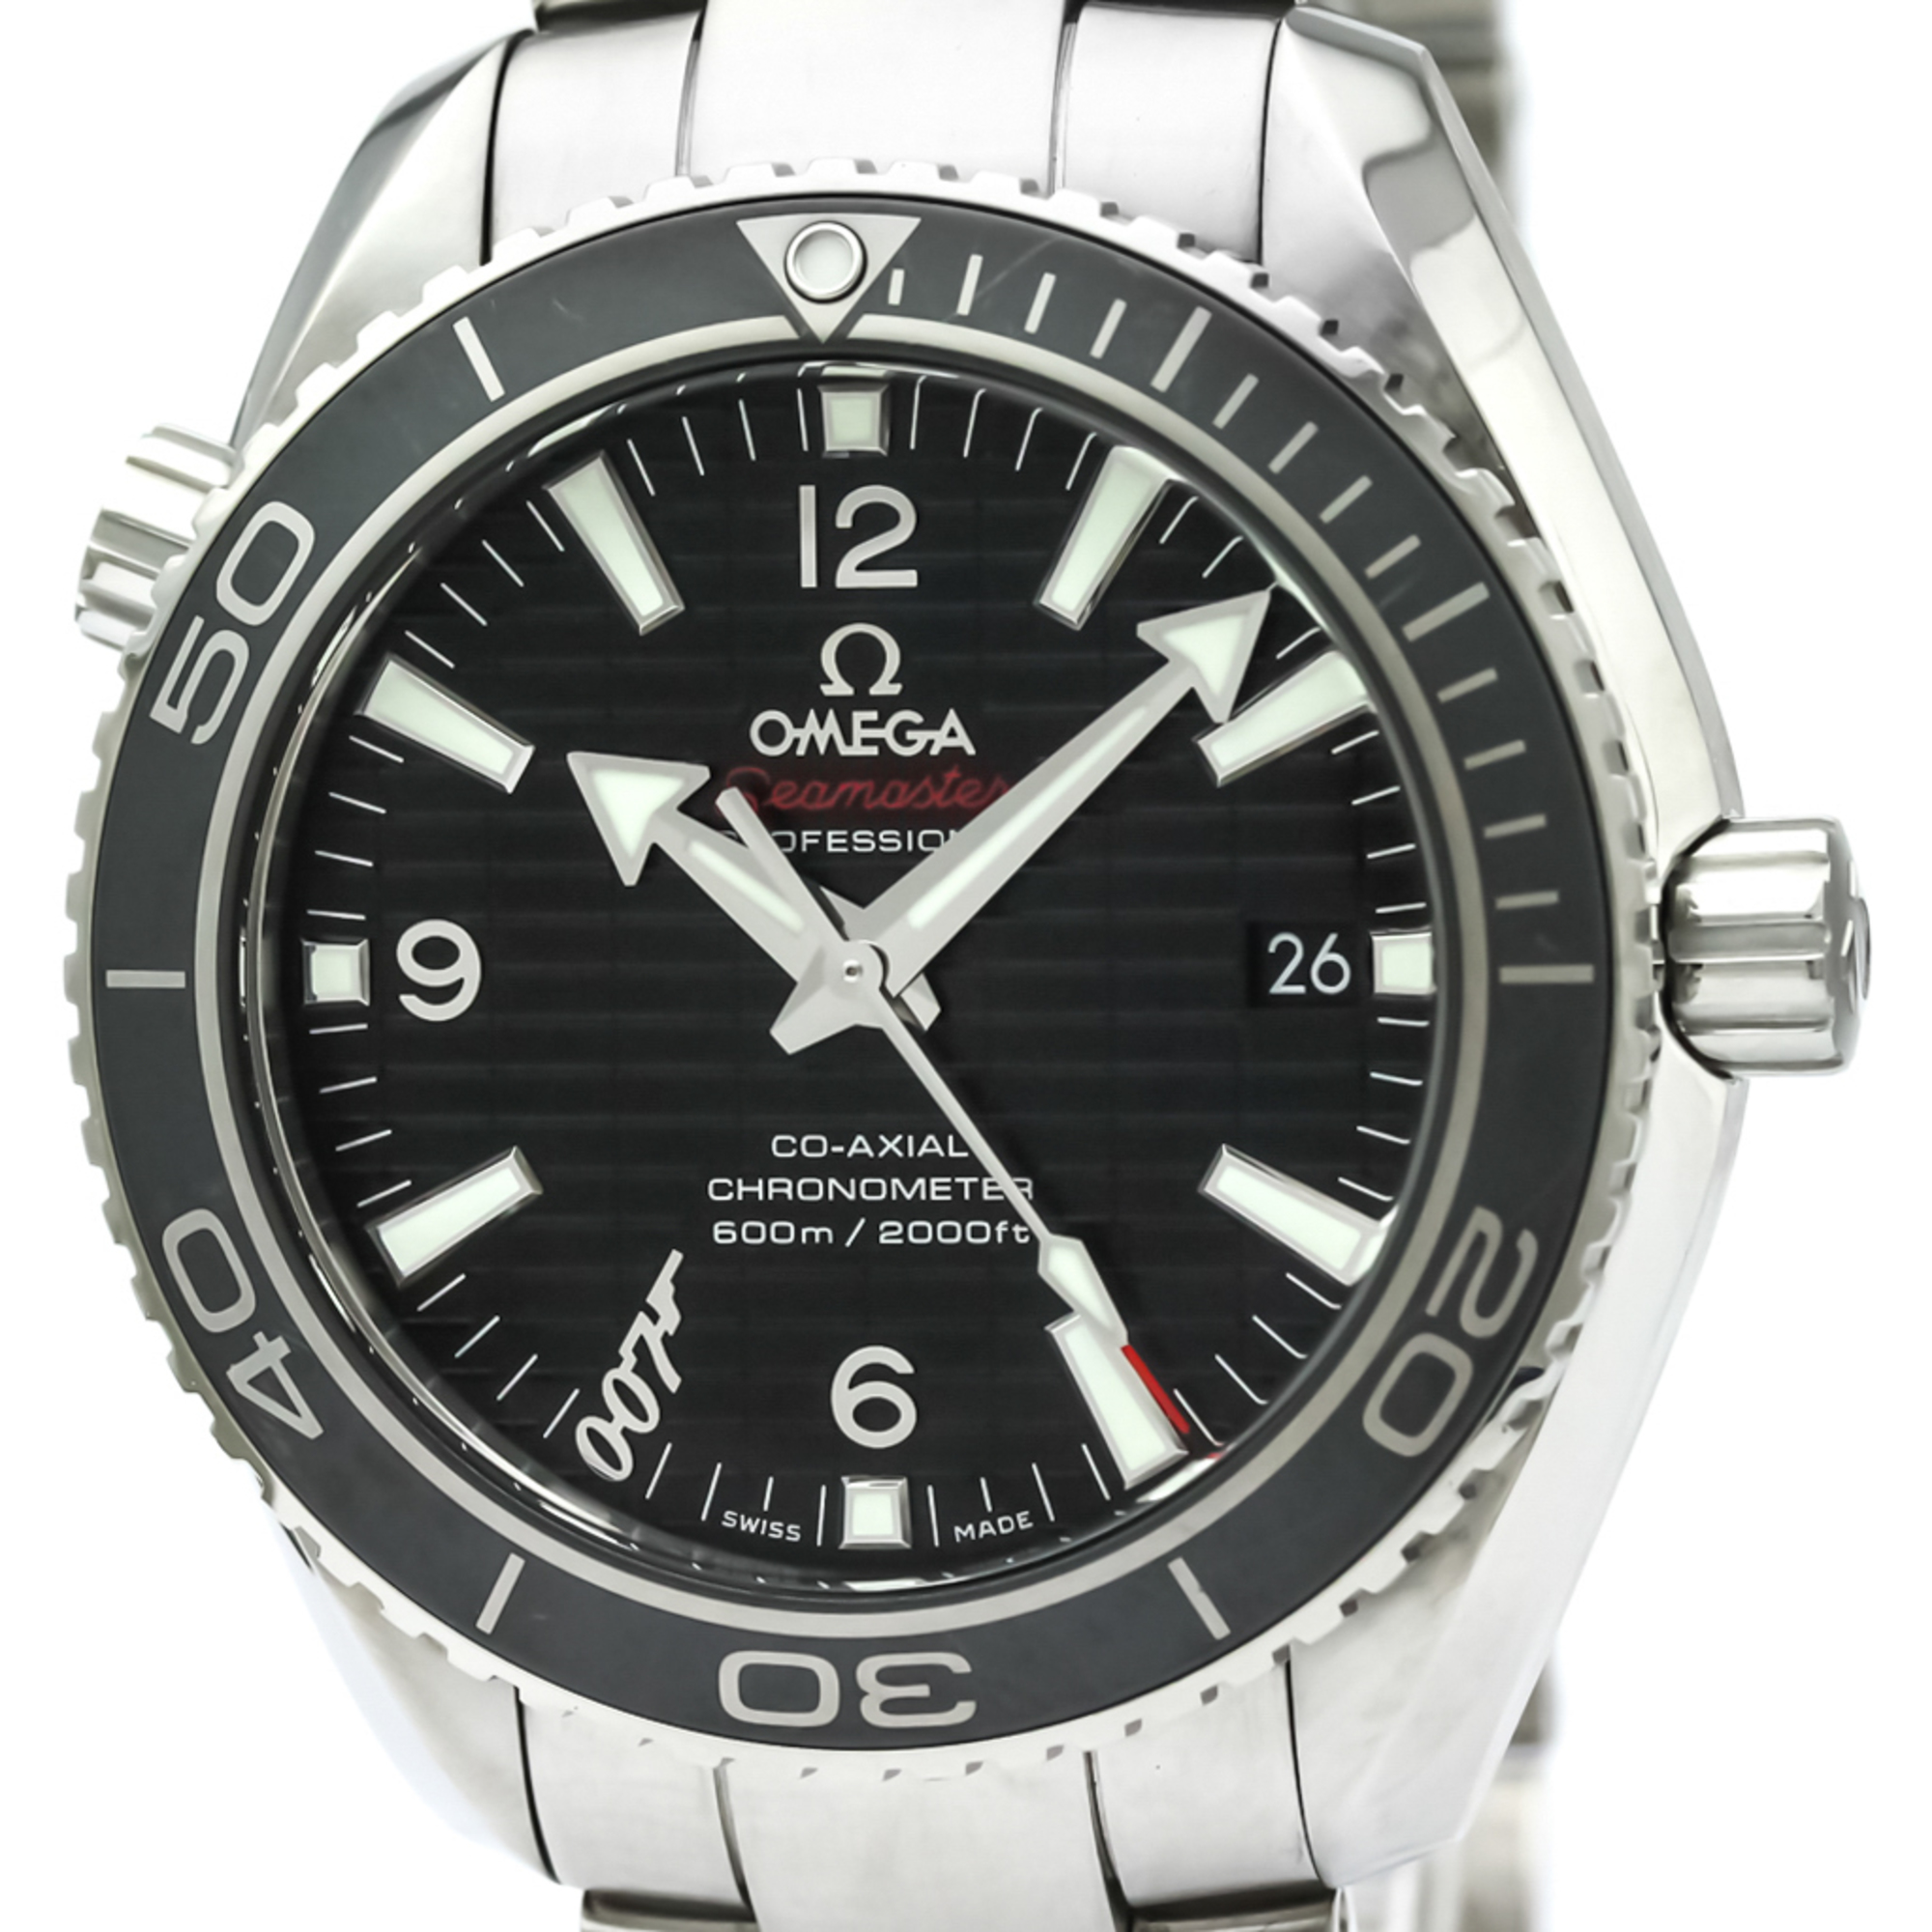 Omega Seamaster Automatic Stainless Steel Men's Sports Watch 232.30.42.21.01.004